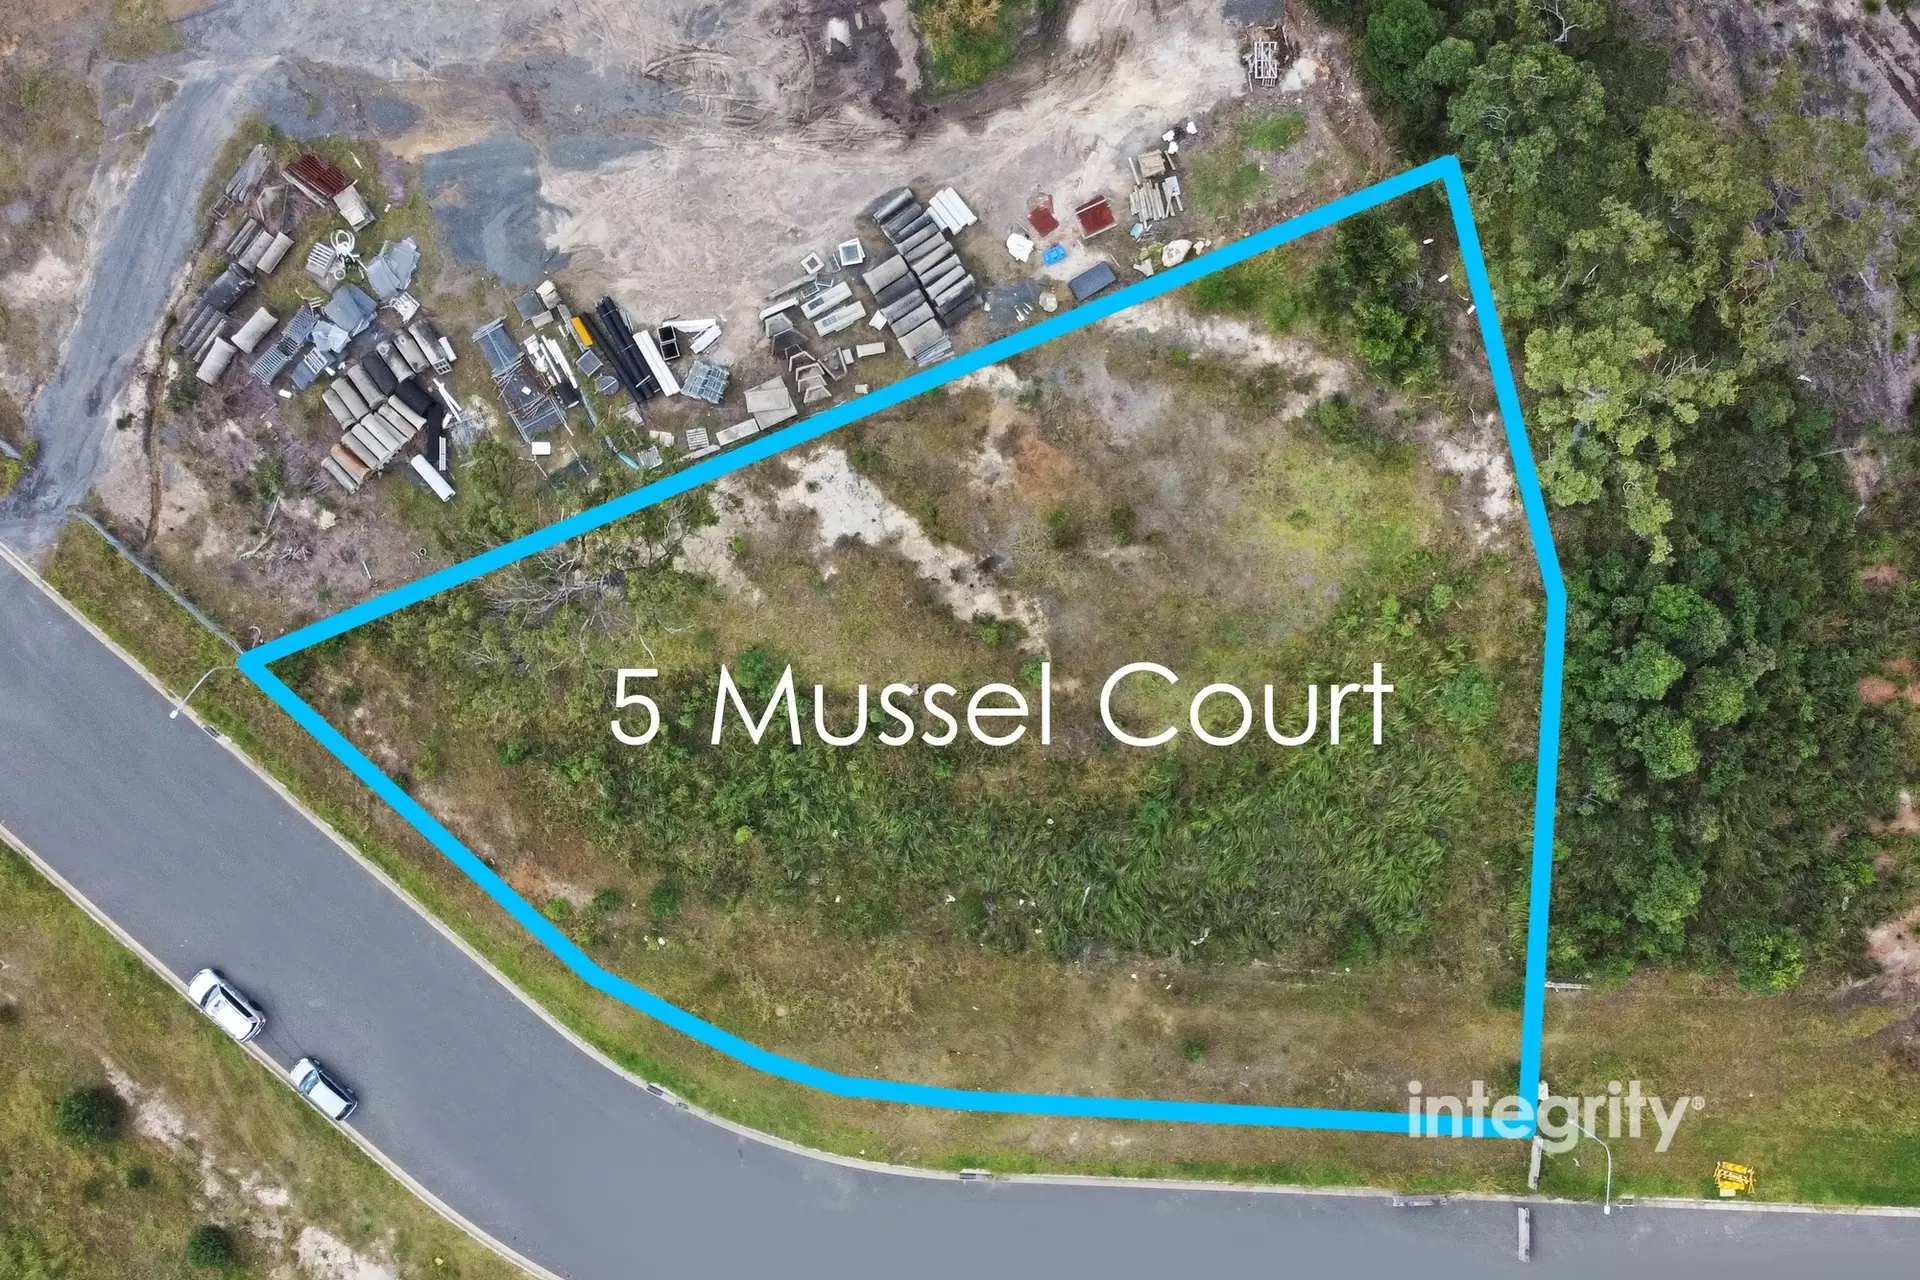 5 Mussel Court, Huskisson Auction by Integrity Real Estate - image 4